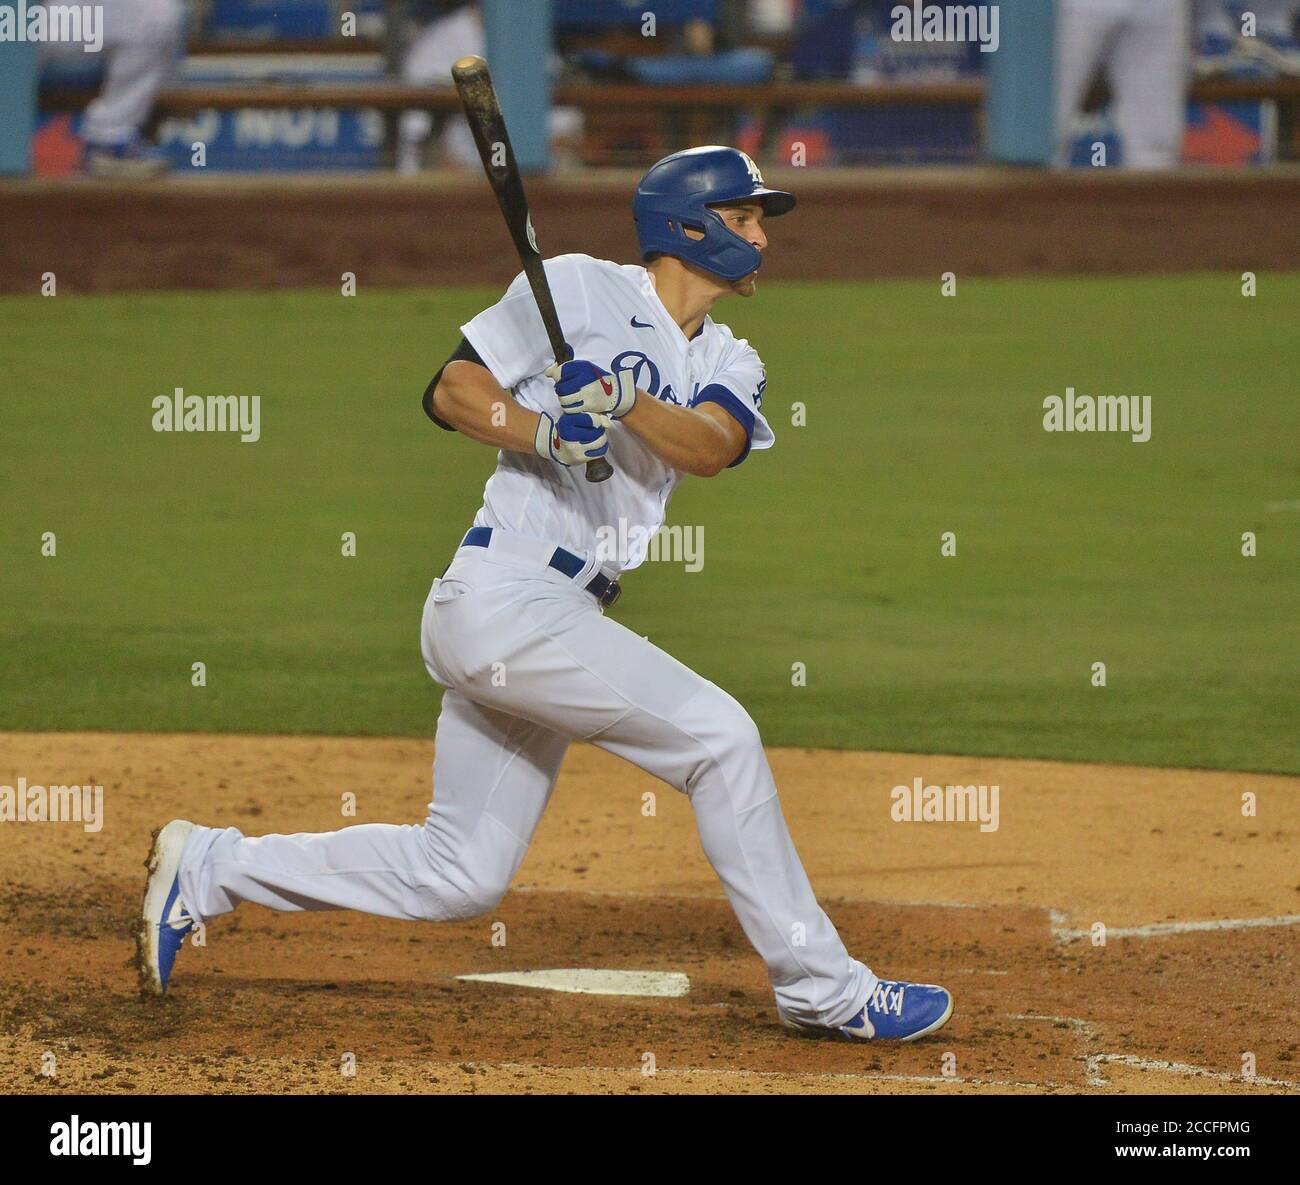 corey-seager-of-the-los-angeles-dodgers-reacts-to-his-fly-out-to-end-picture-id540882168  739×1,024 pixels